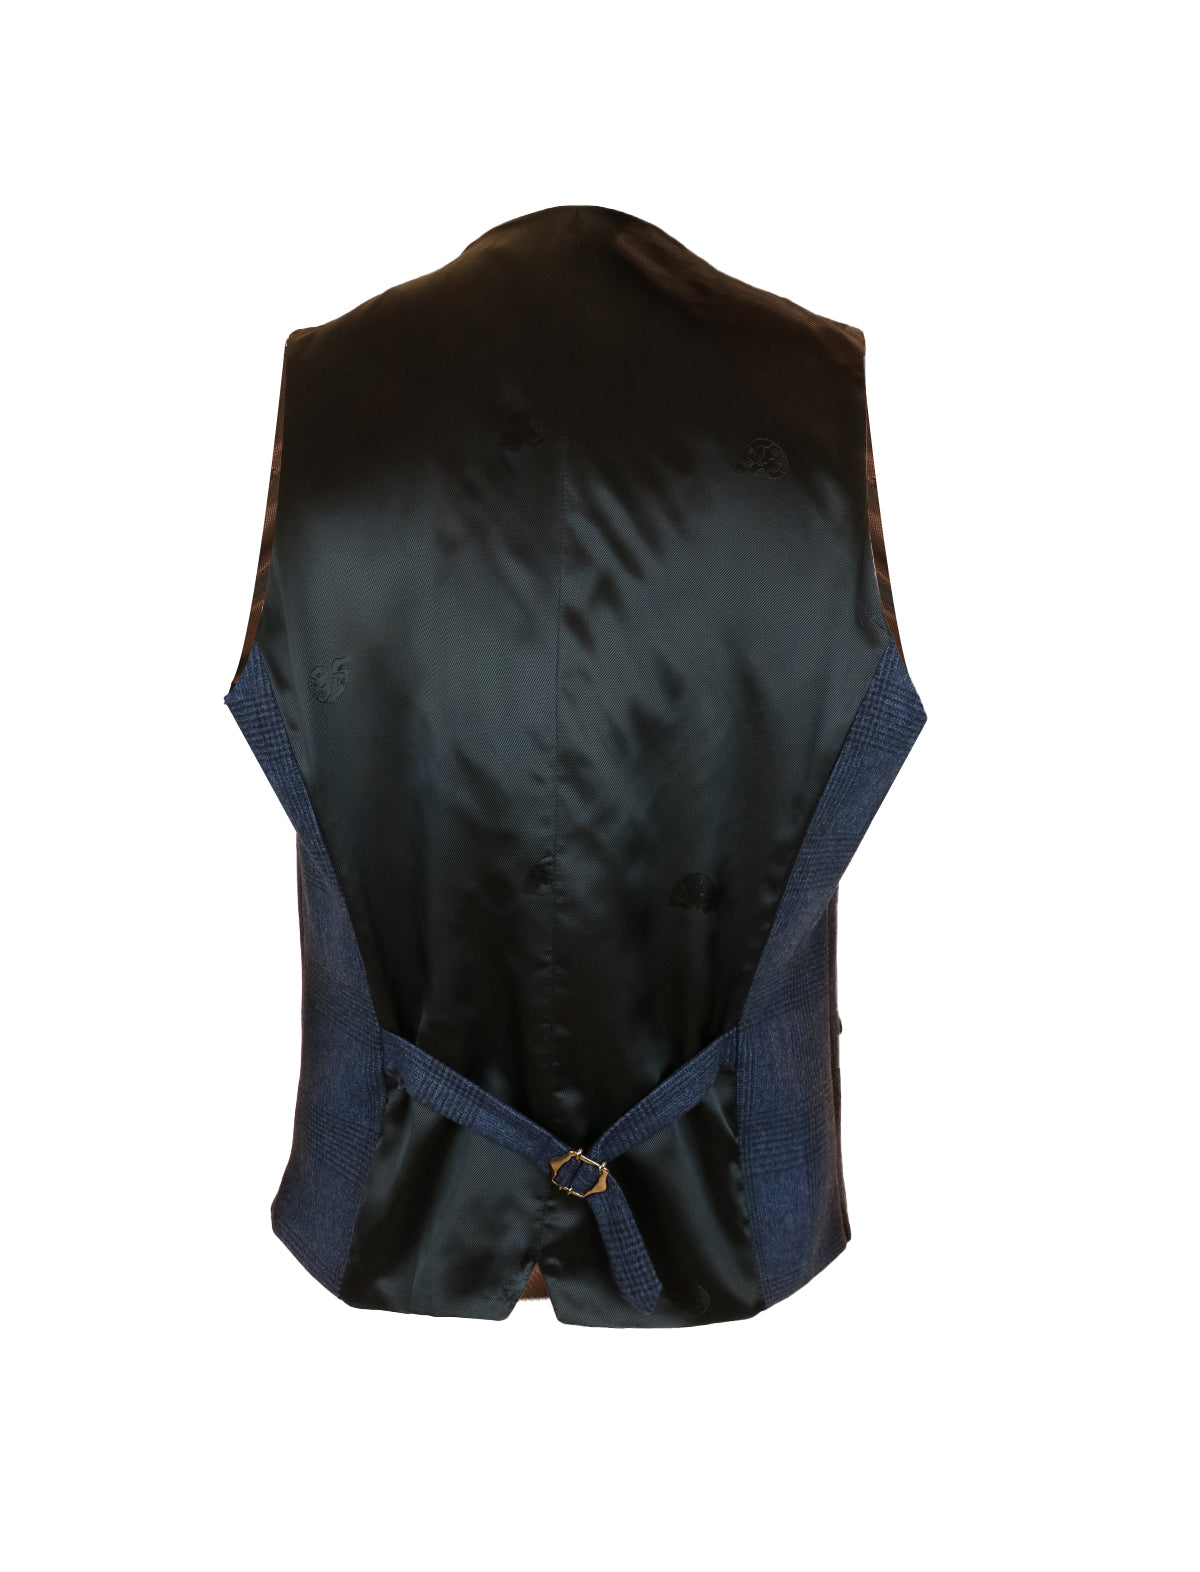 GABRIELE PASINI Double-Breasted Vest in Navy